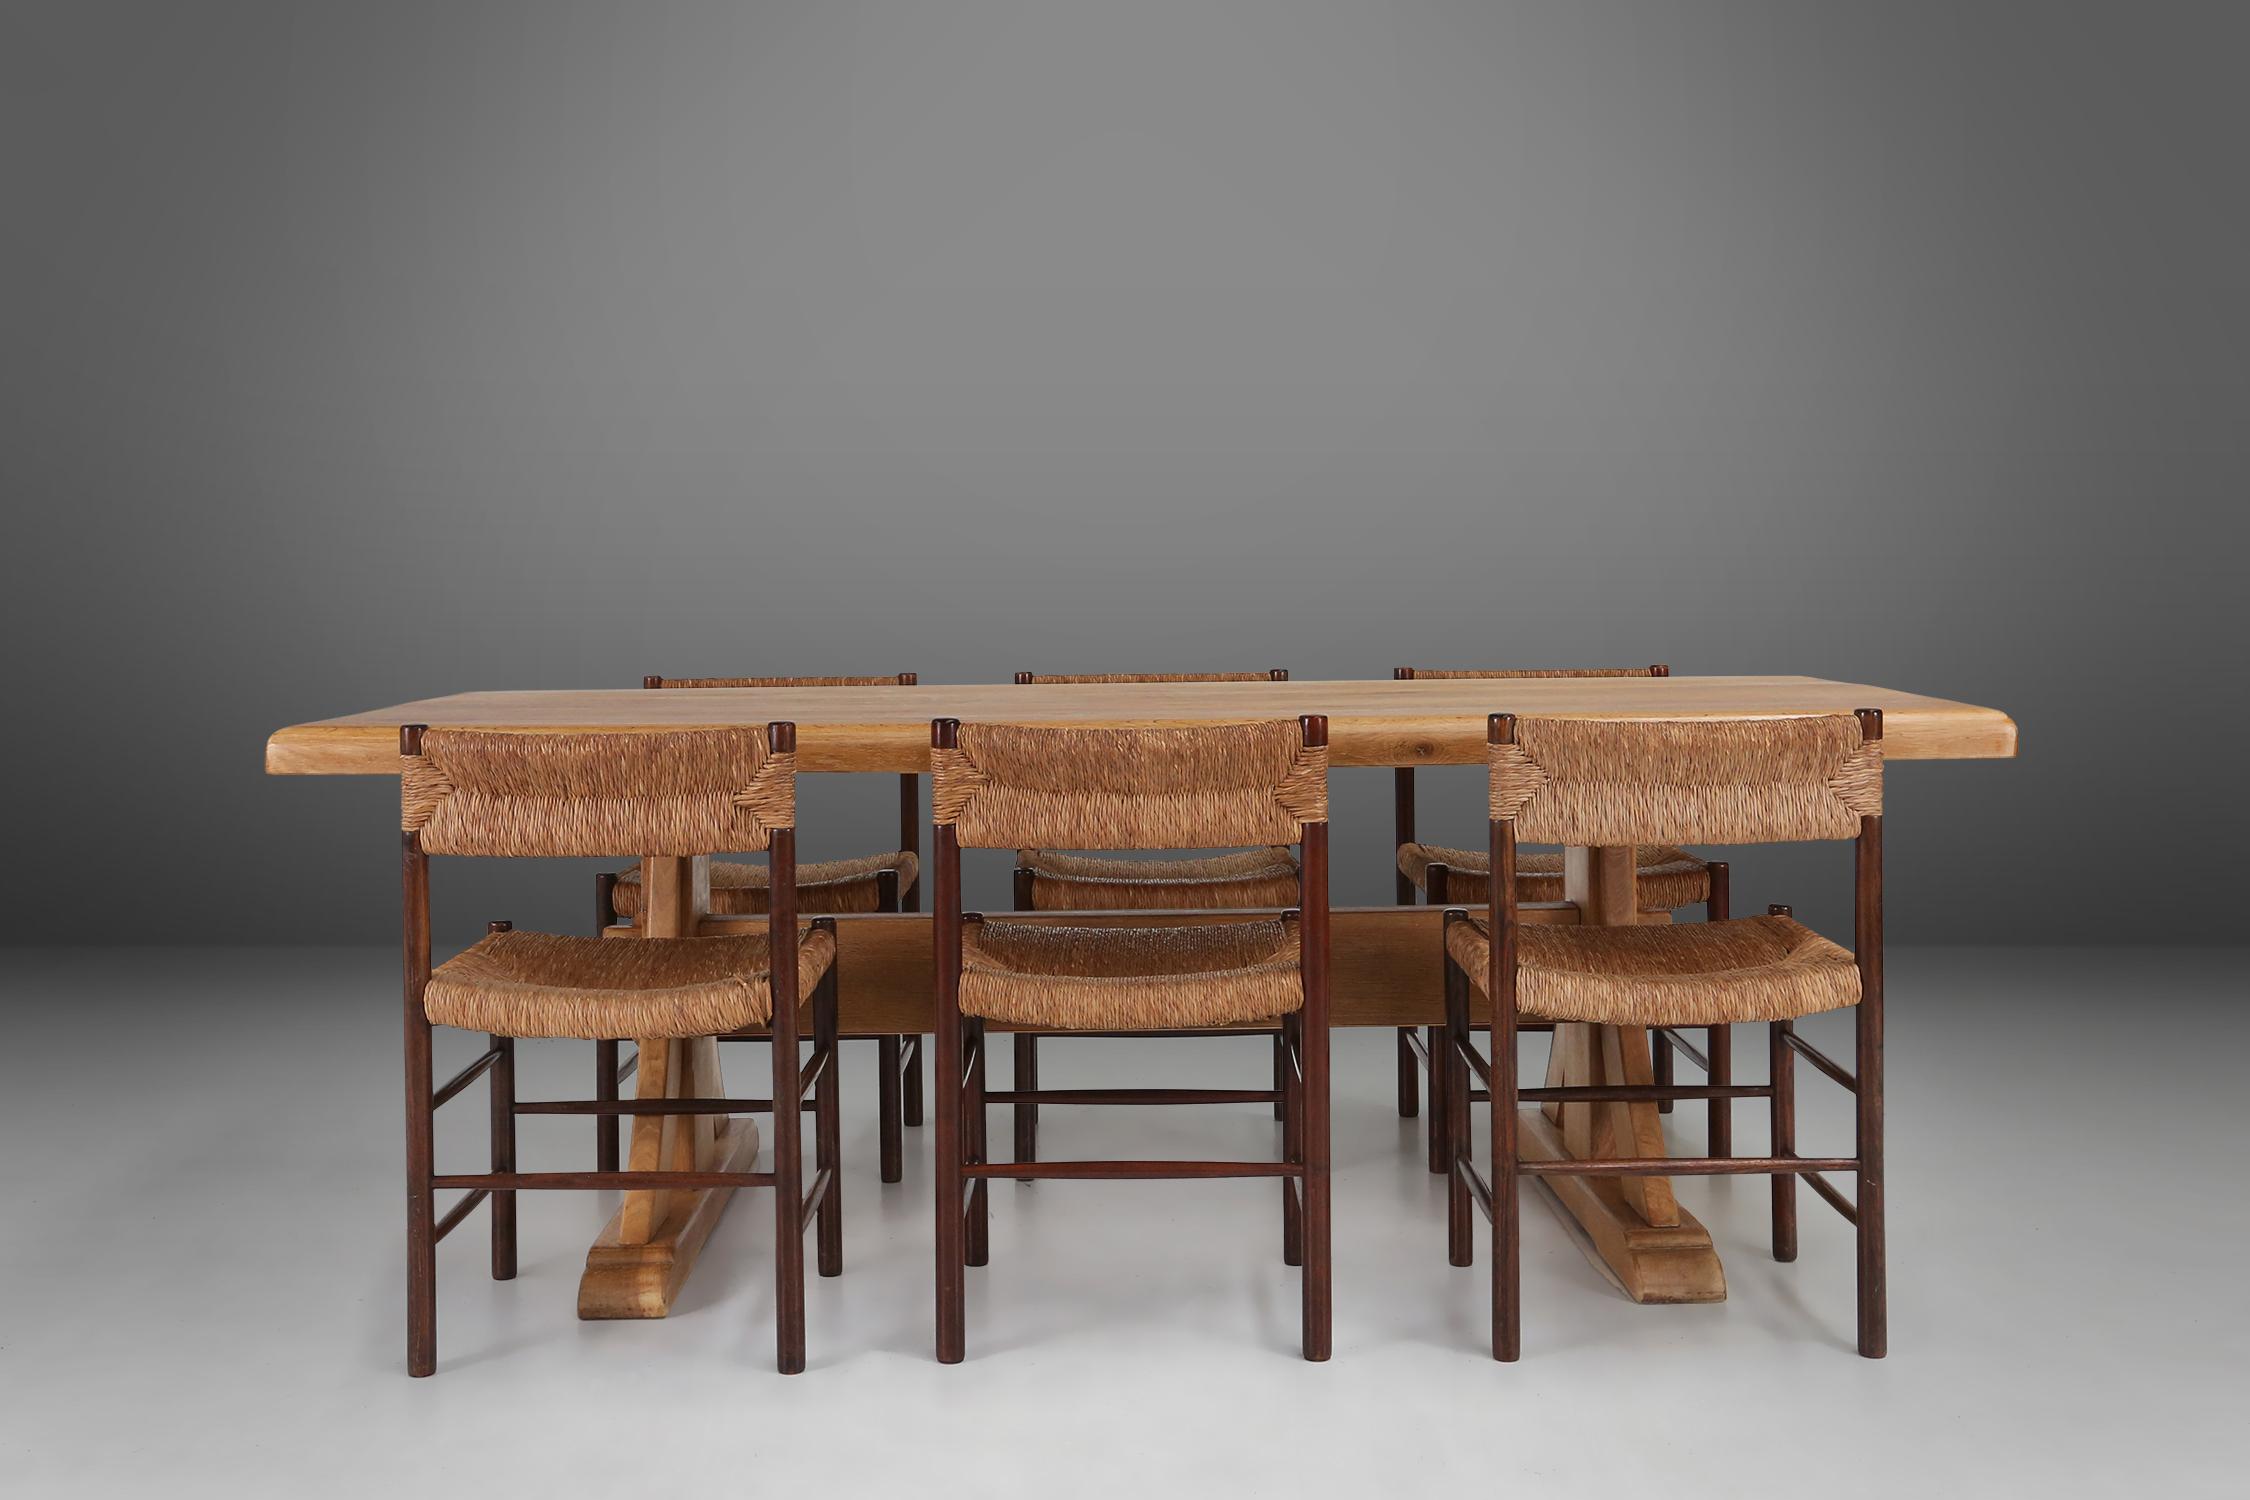 France / 1950s / table / oak wood / mid-century / rustic

This beautifully crafted table is a true gem from the 1950s in France. Made from high-quality oak wood, this mid-century piece exudes a rustic charm that is sure to elevate any space it is